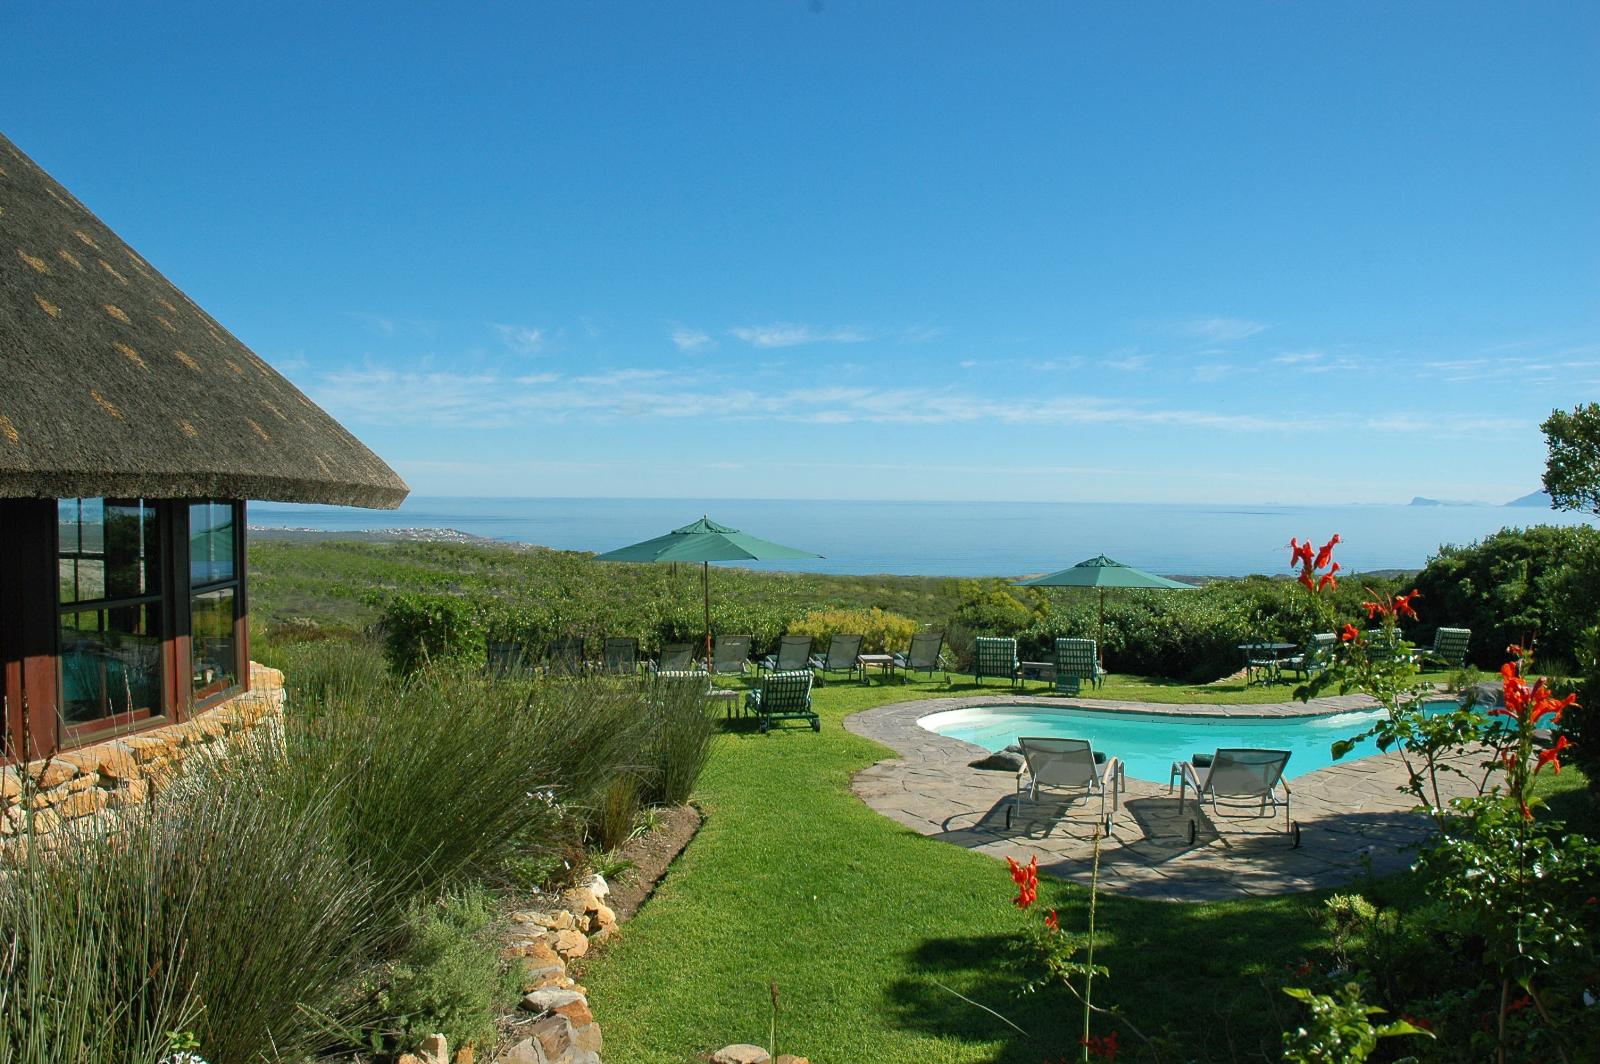 Garden Lodge - Grootbos Private Nature Reserve